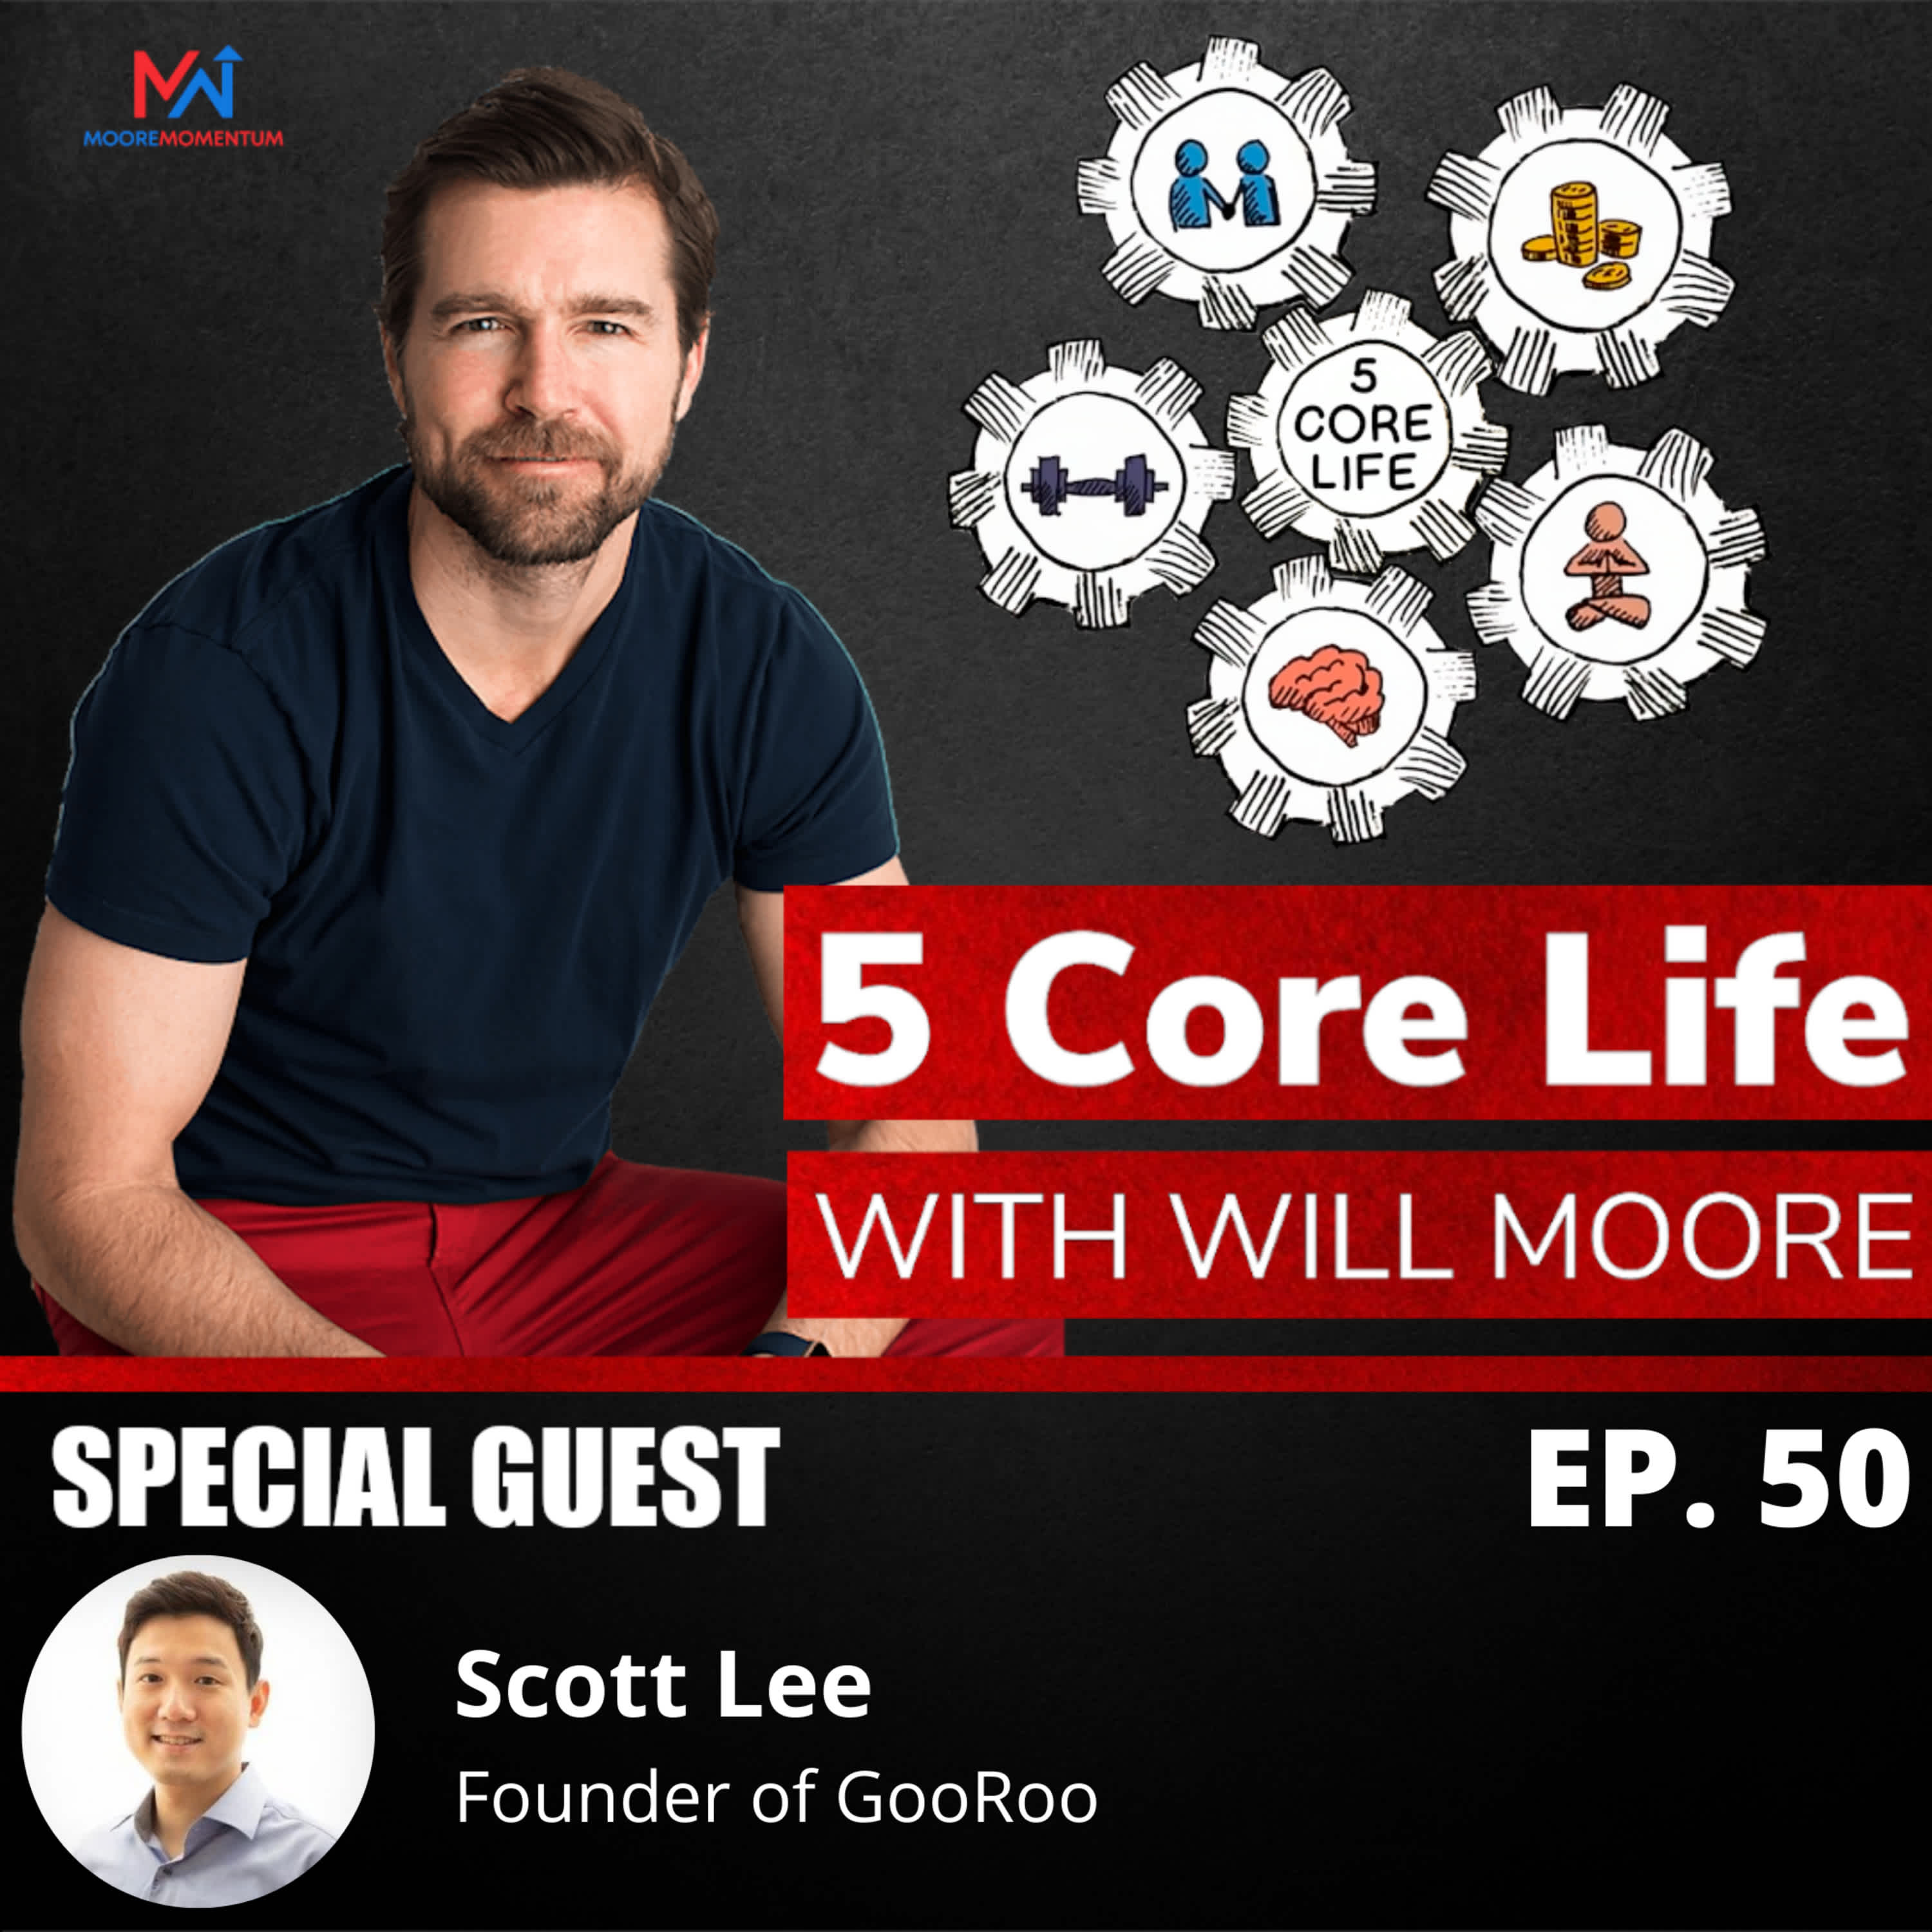 Tackling the Broken Education System with Scott Lee founder of Gooroo